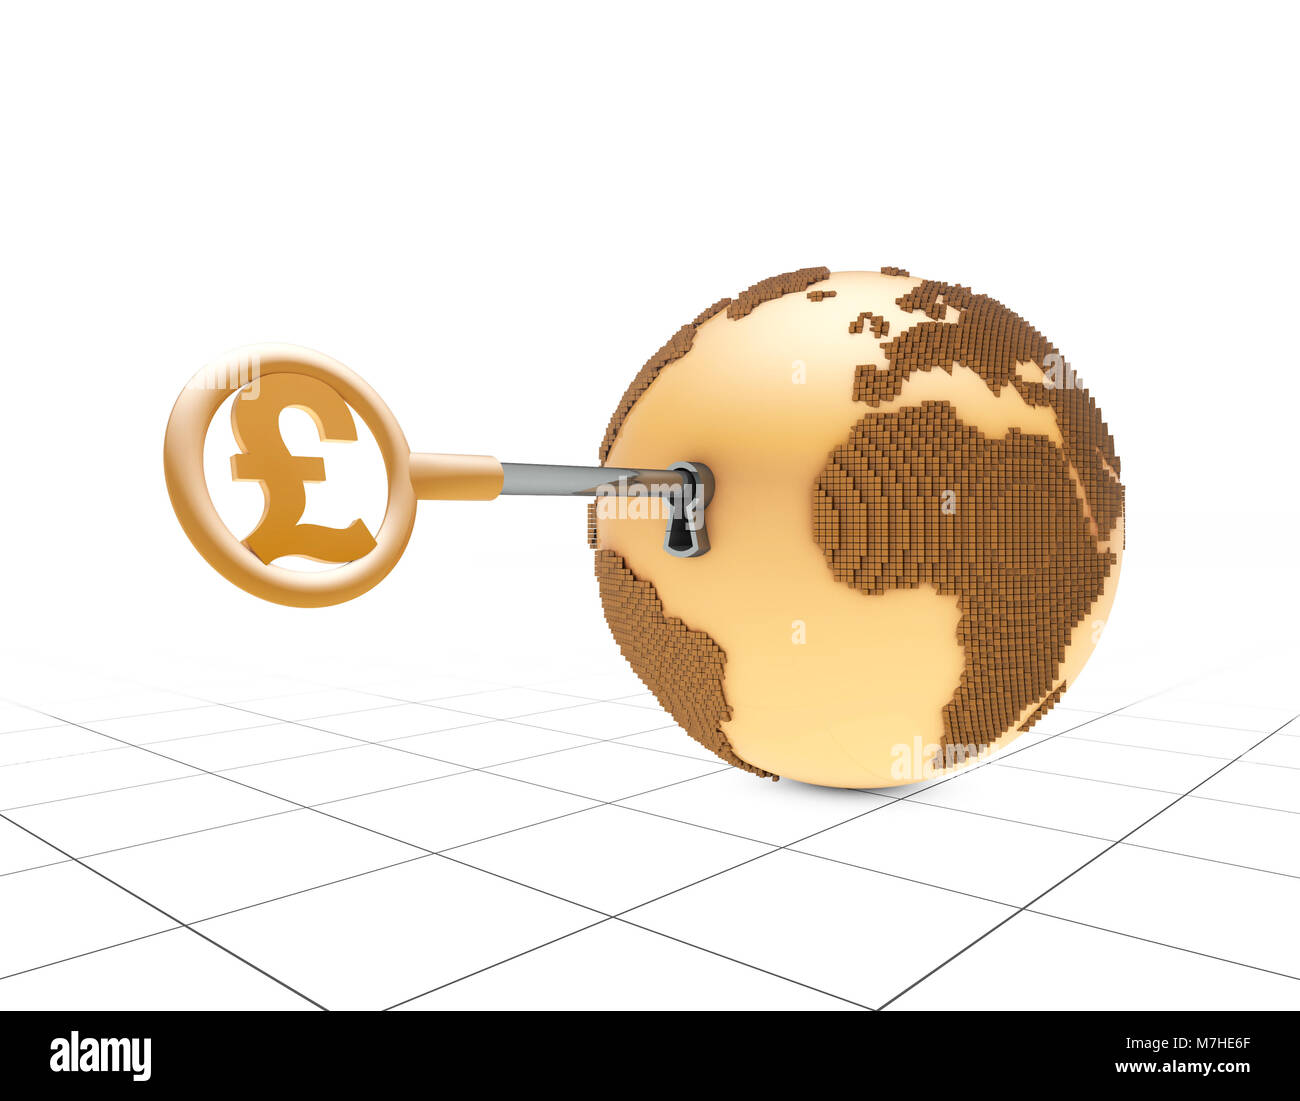 Earth and currency financial keys, representing economic development, capital investment Stock Photo